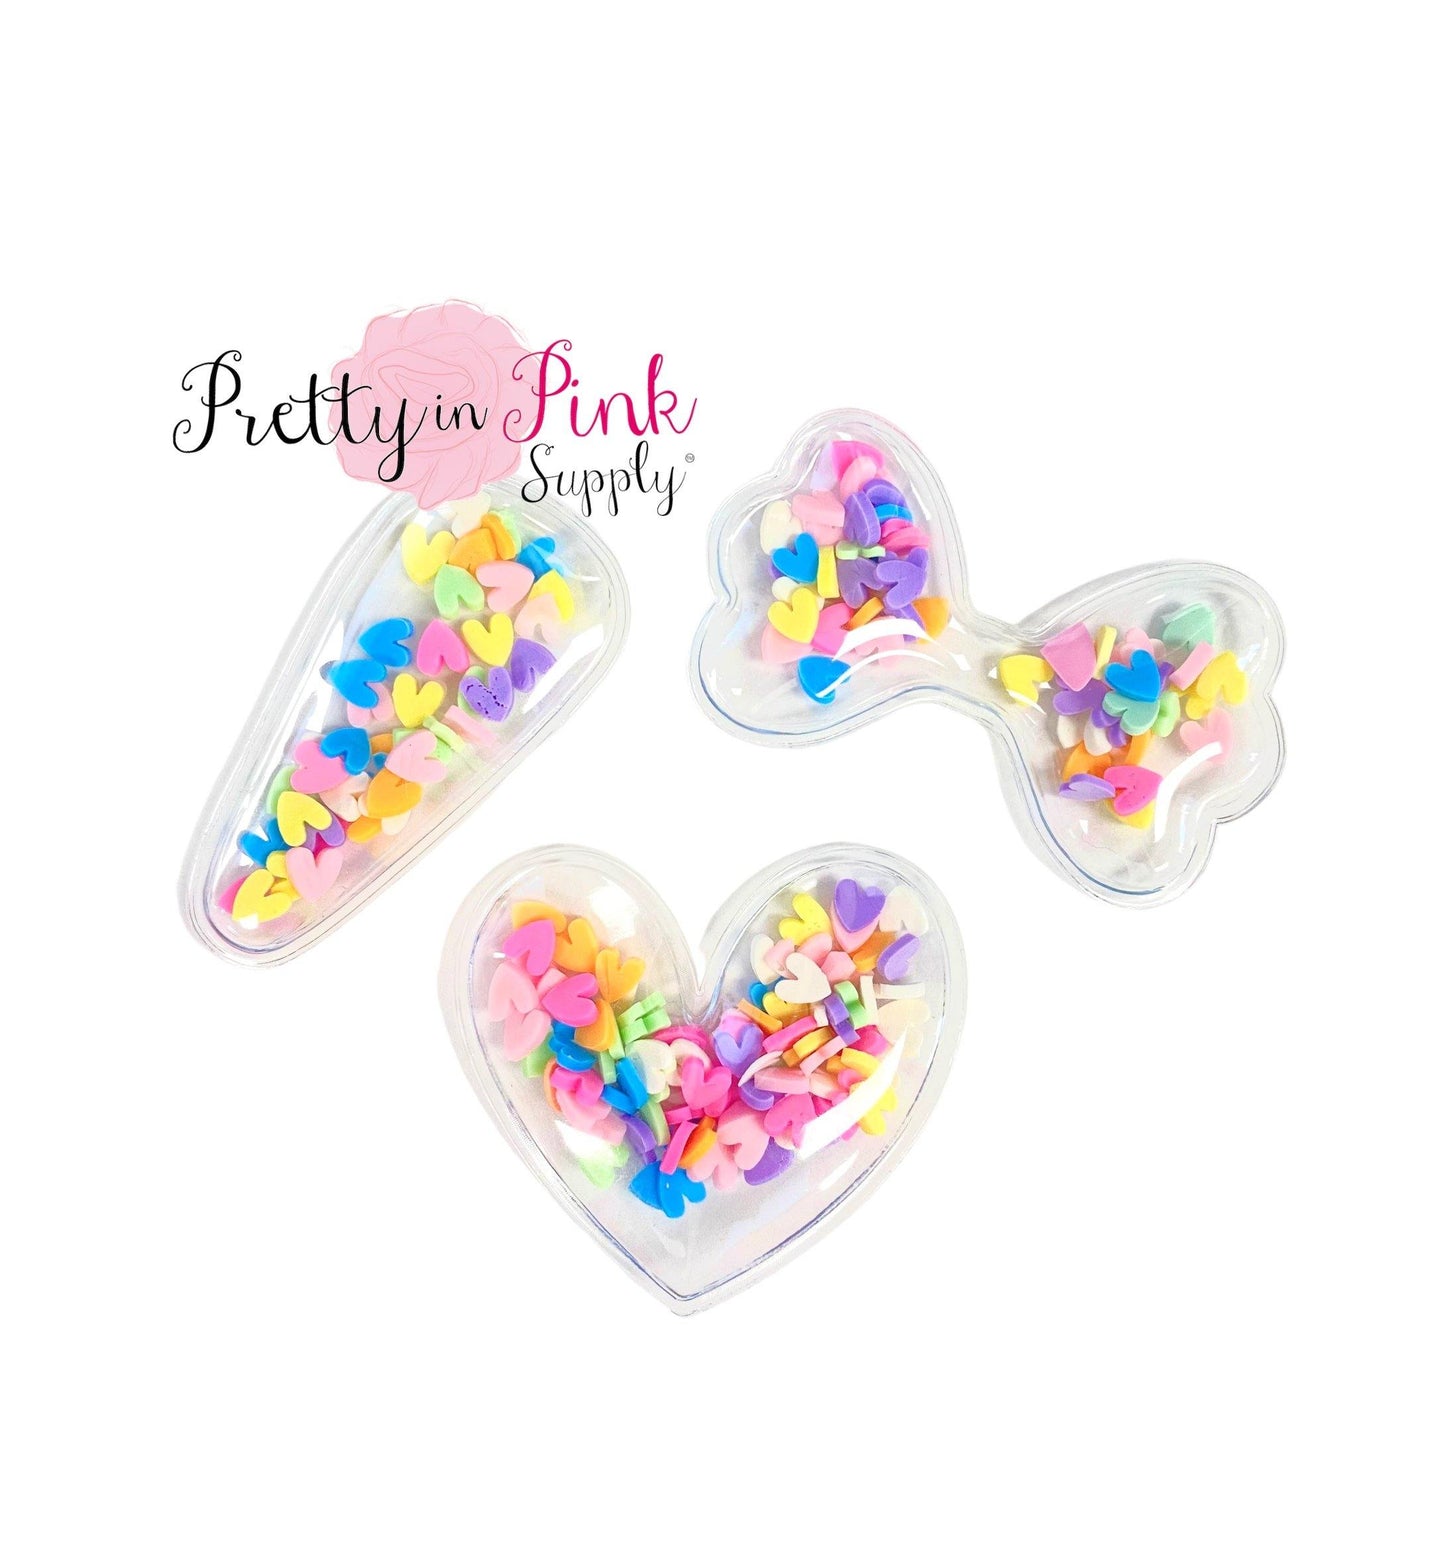 Pastel rainbow hearts clay slices filled shakers in heart shape, bow shape, and clip cover shape.